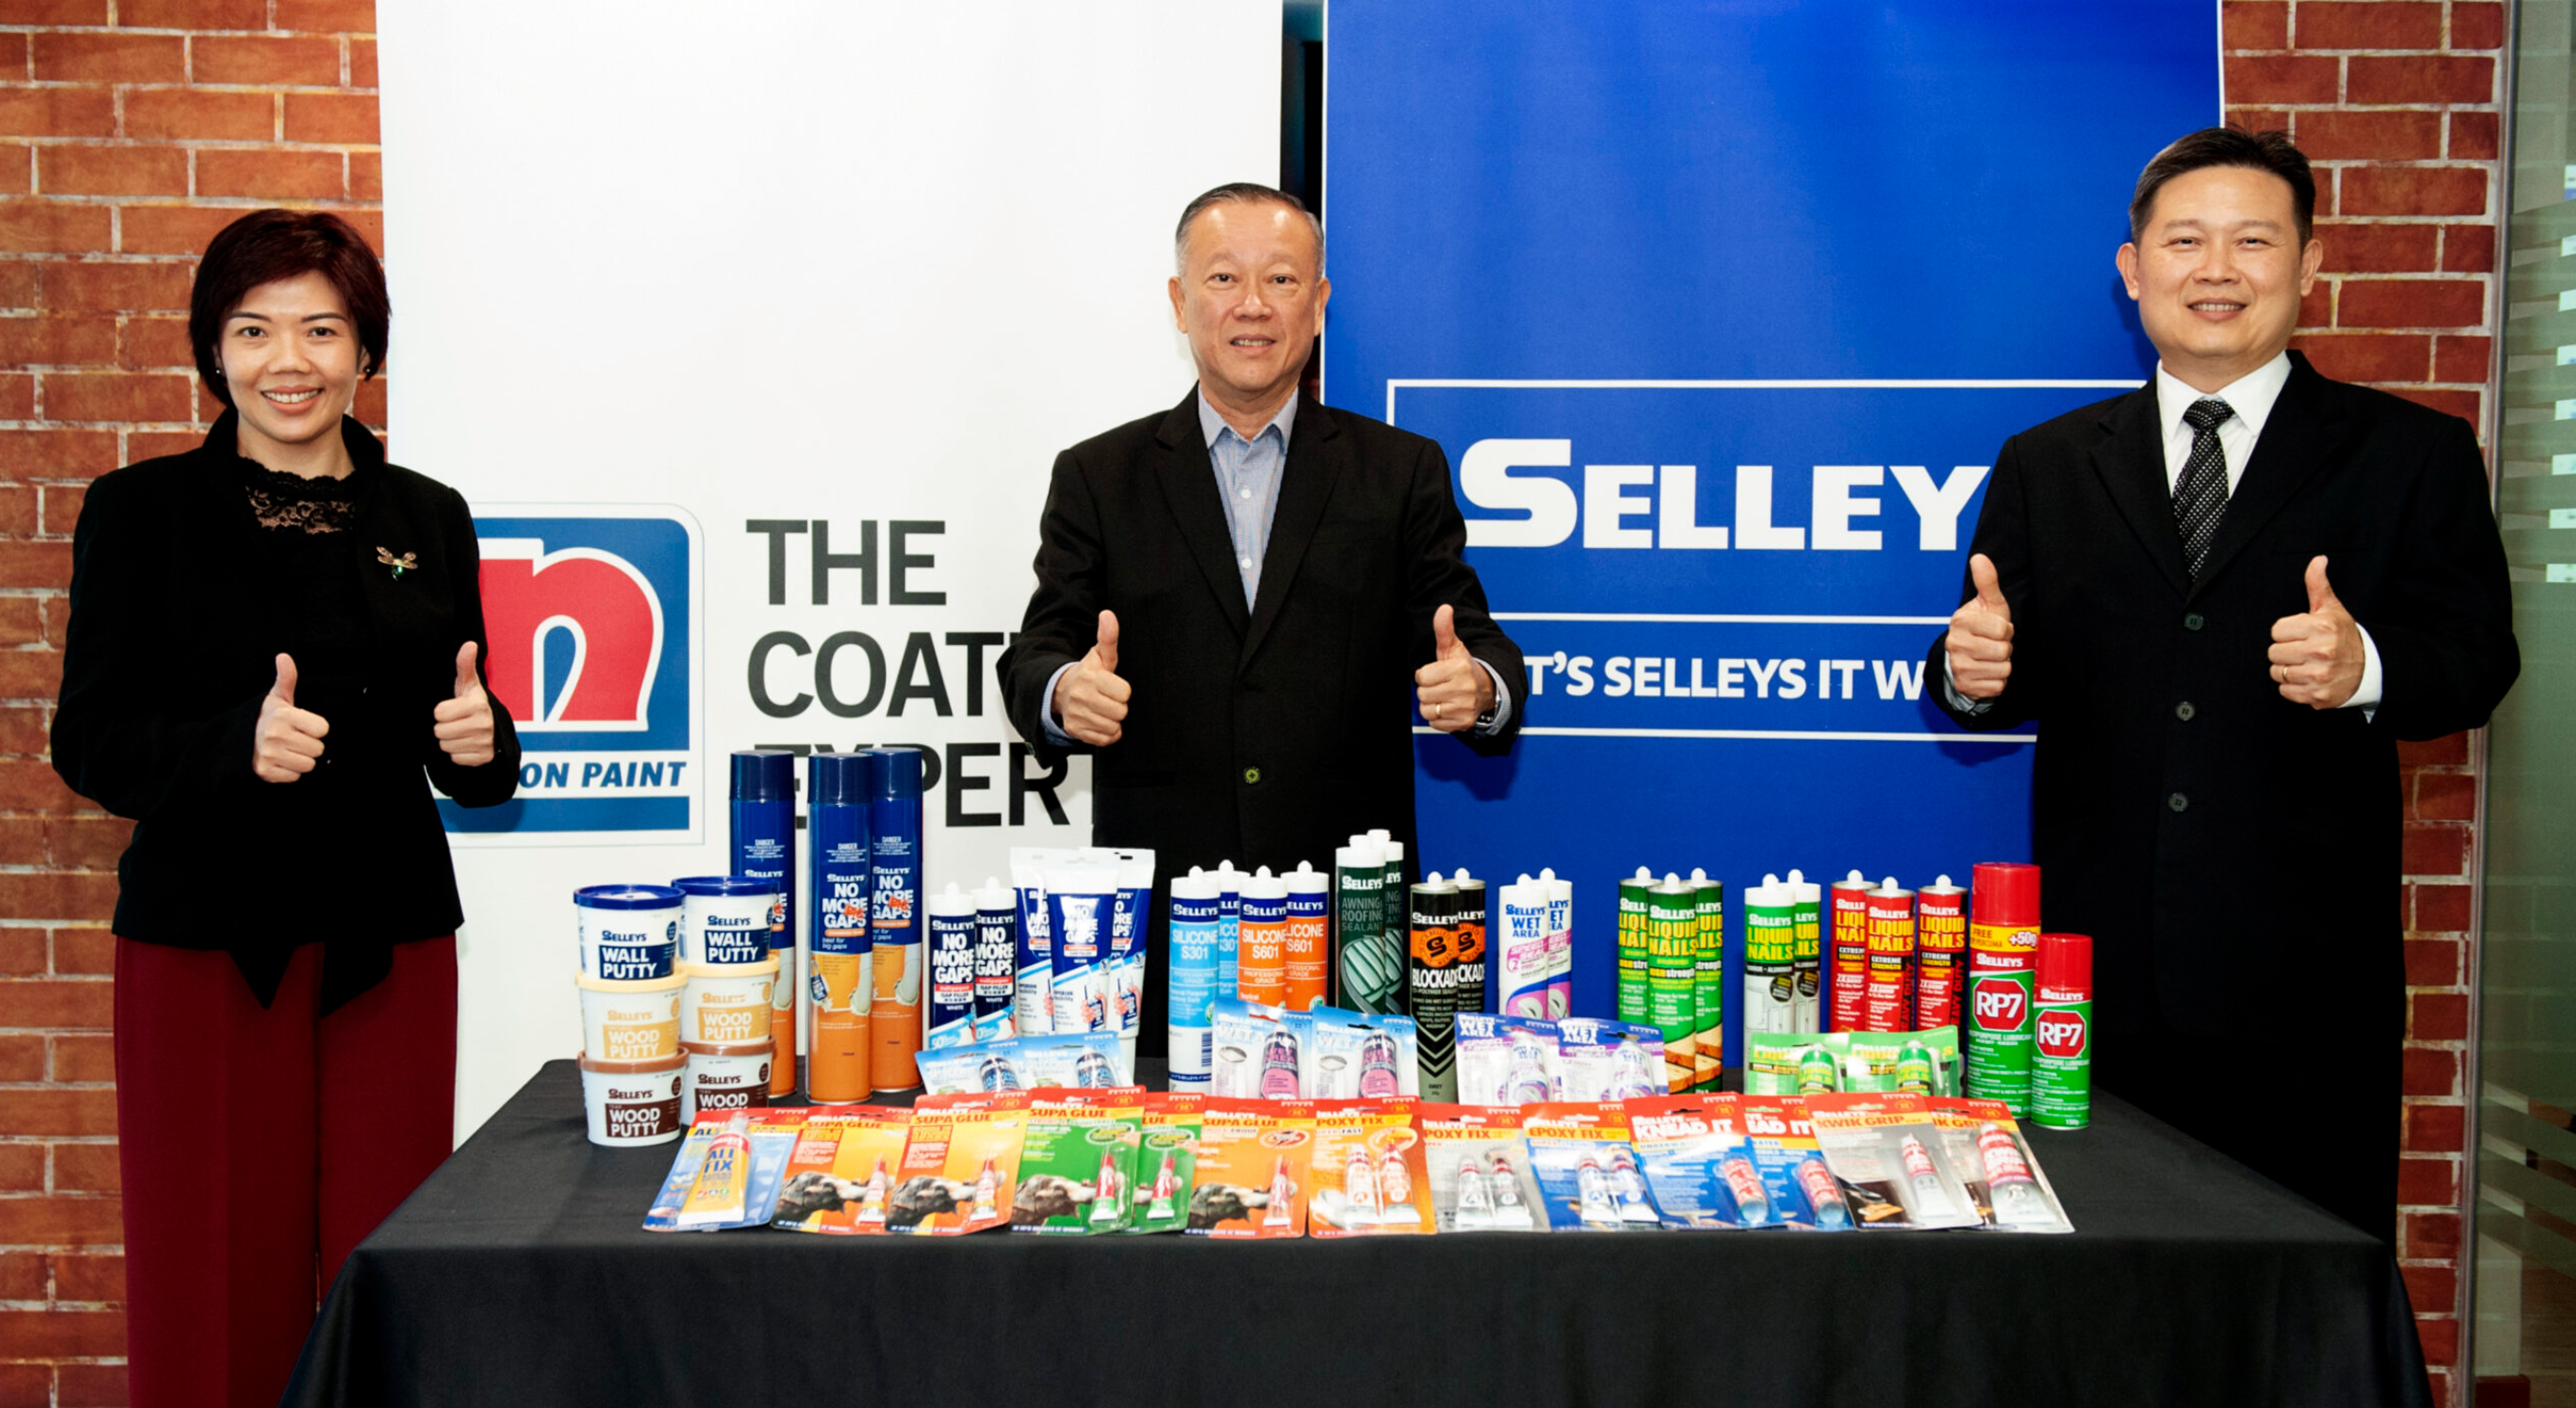 Nippon Paint Malaysia integrates its business with Selleys, a leading home improvement brand in Australia for over 80 years